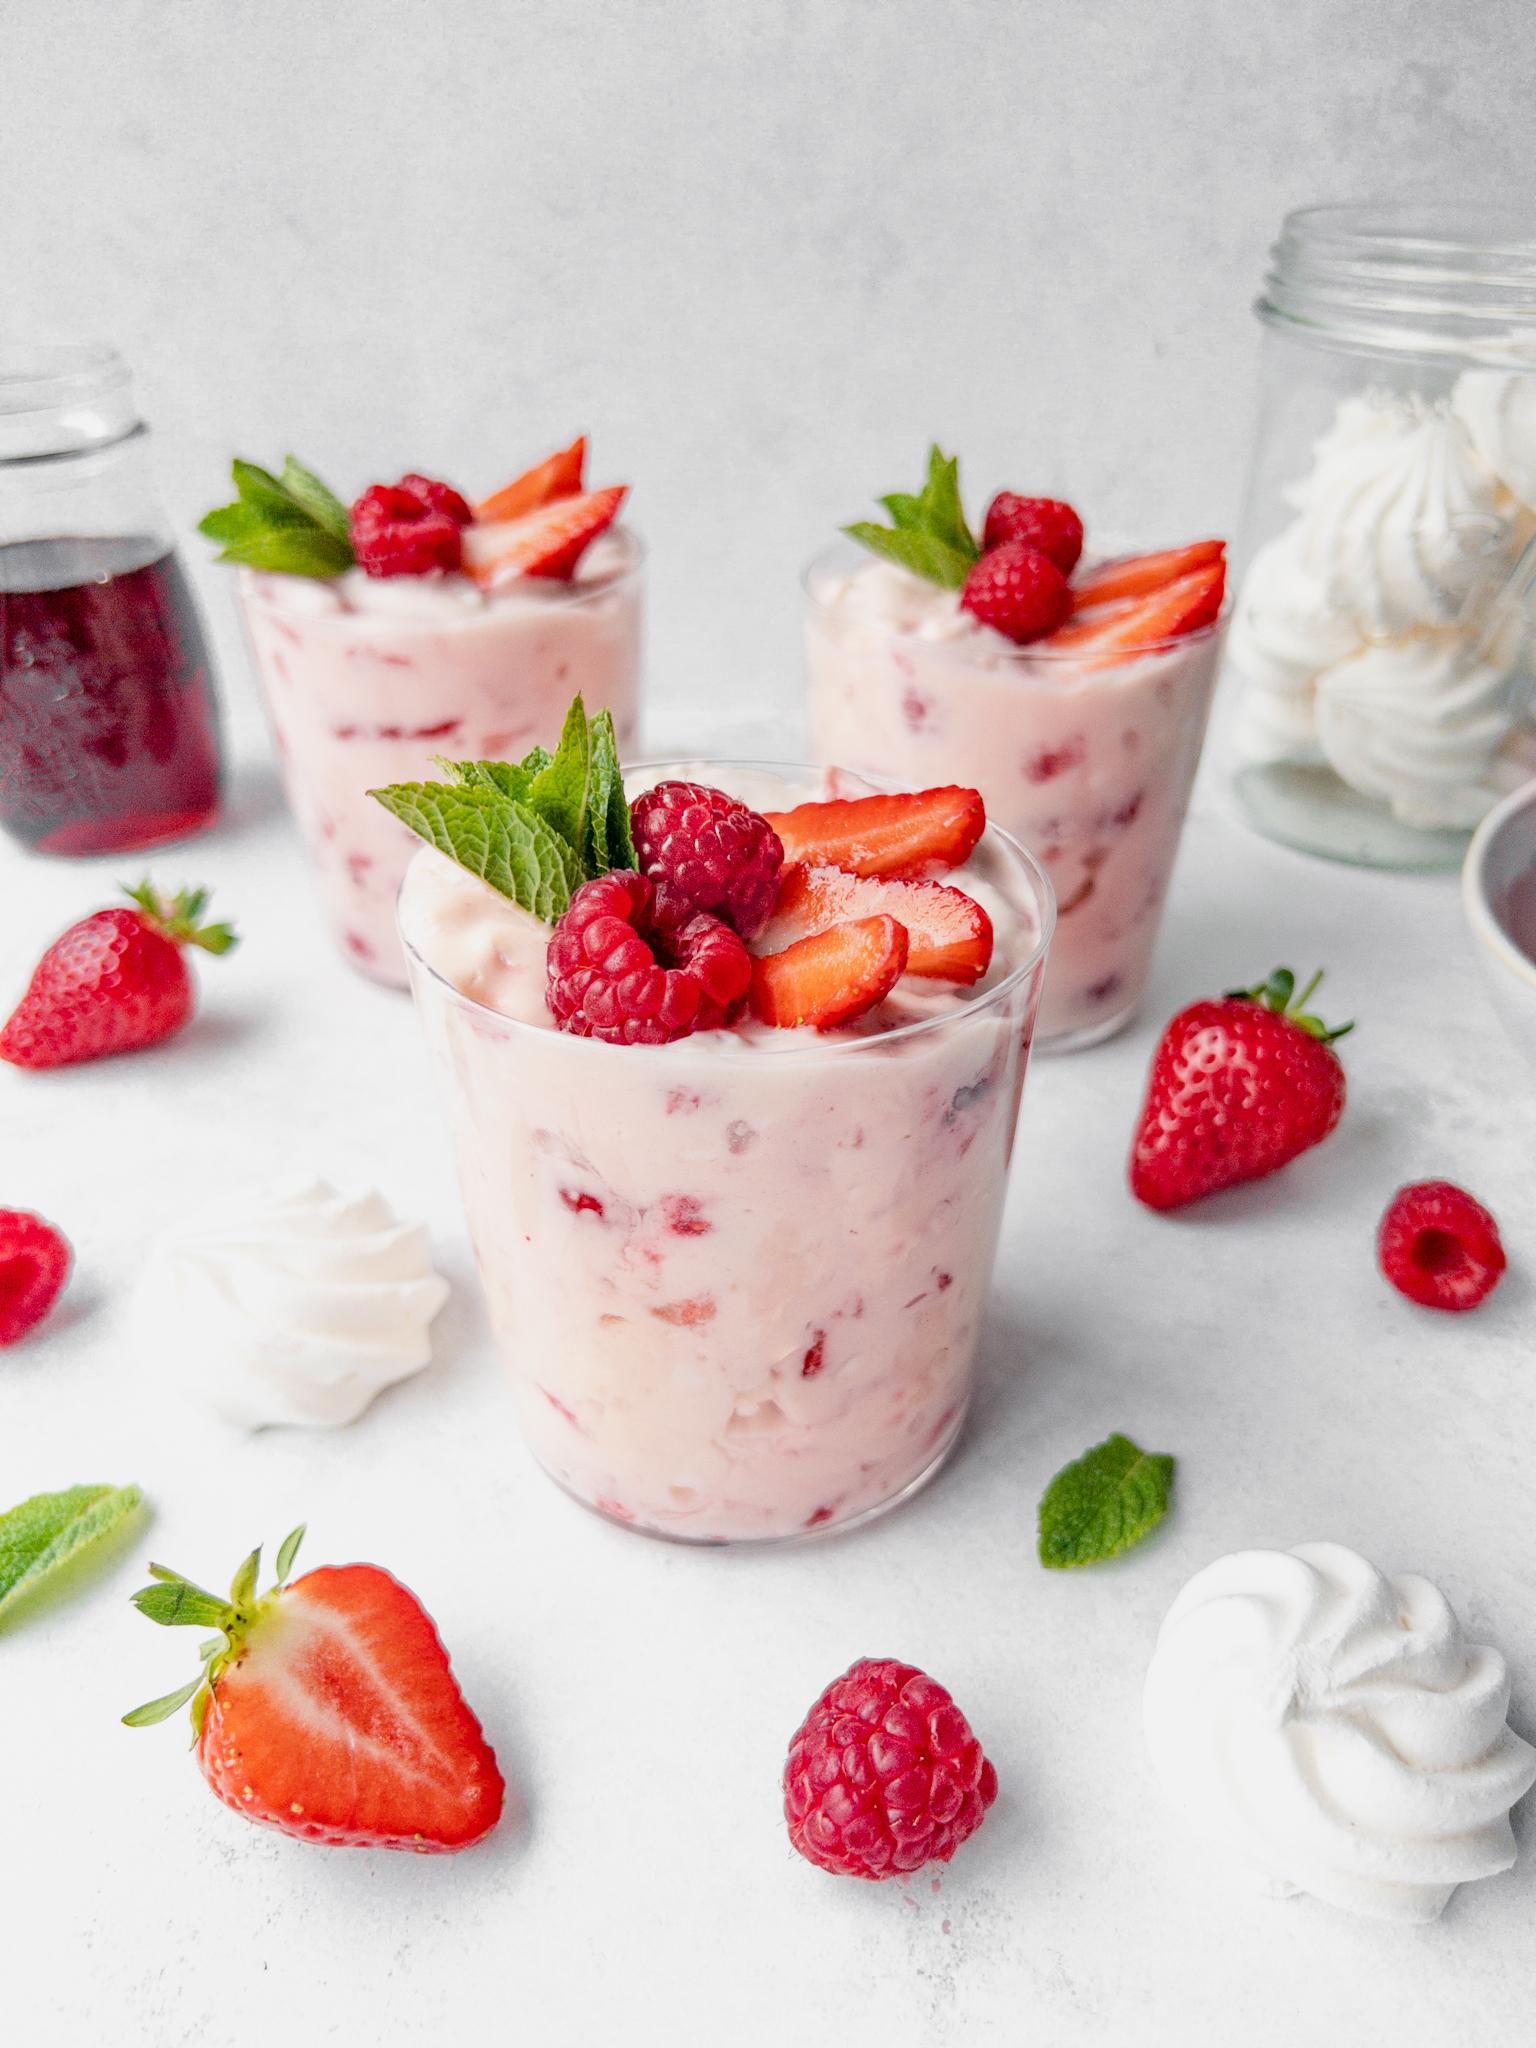 Quick Eton Mess with ready made meringue and shop bought strawberry sauce - family recipes